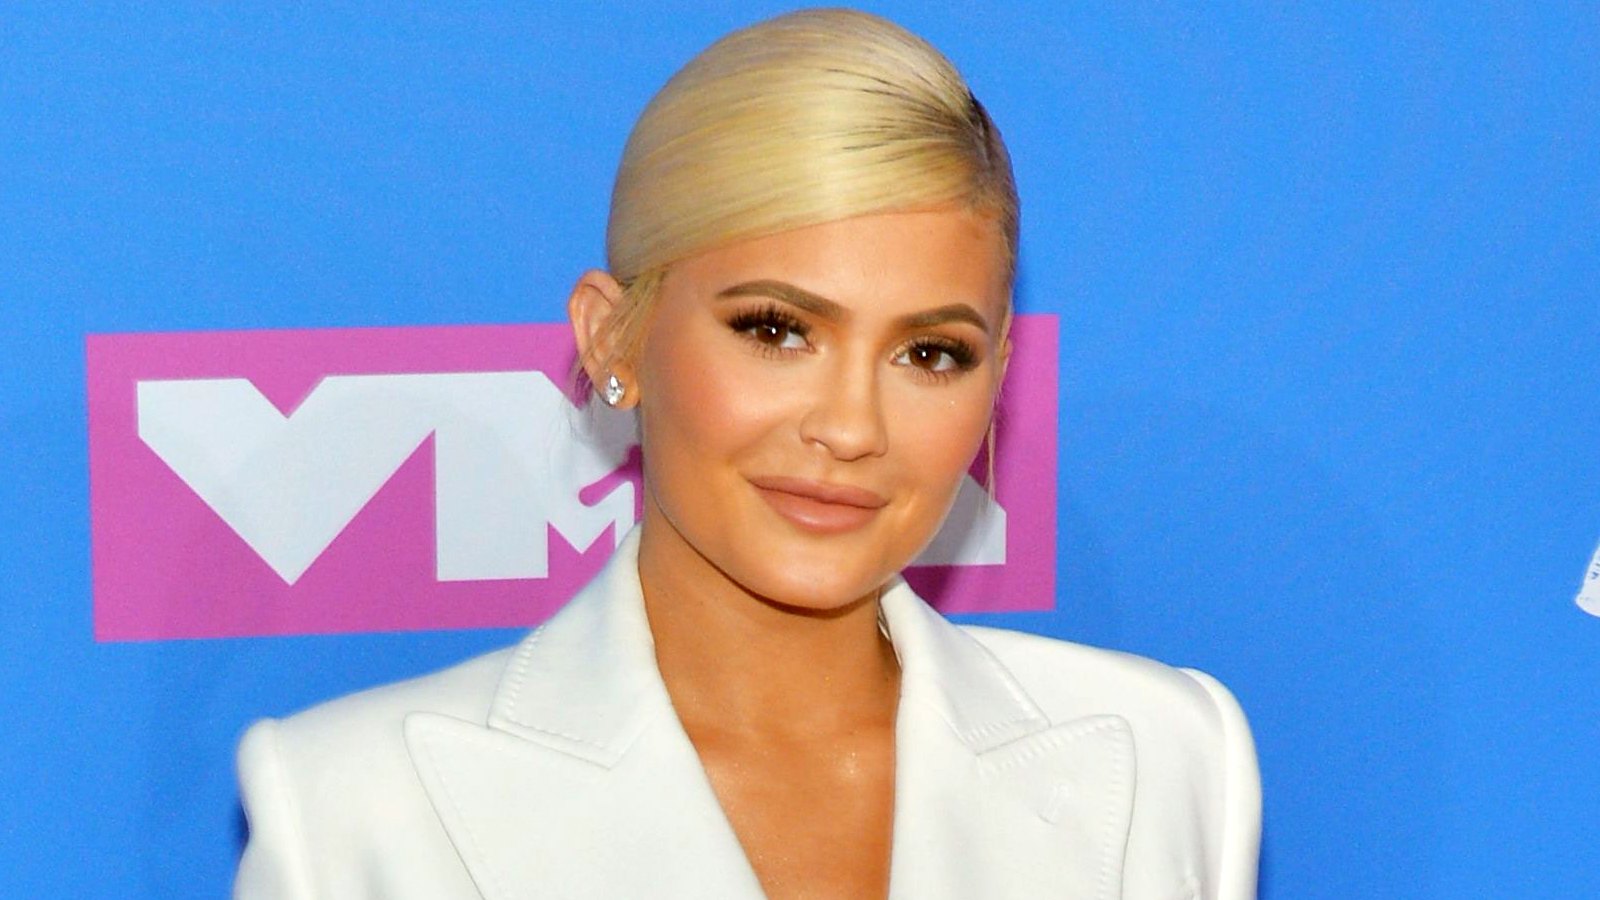 Kylie Jenner Performs Her Iconic Song ‘Rise and Shine’ at Auction Benefit